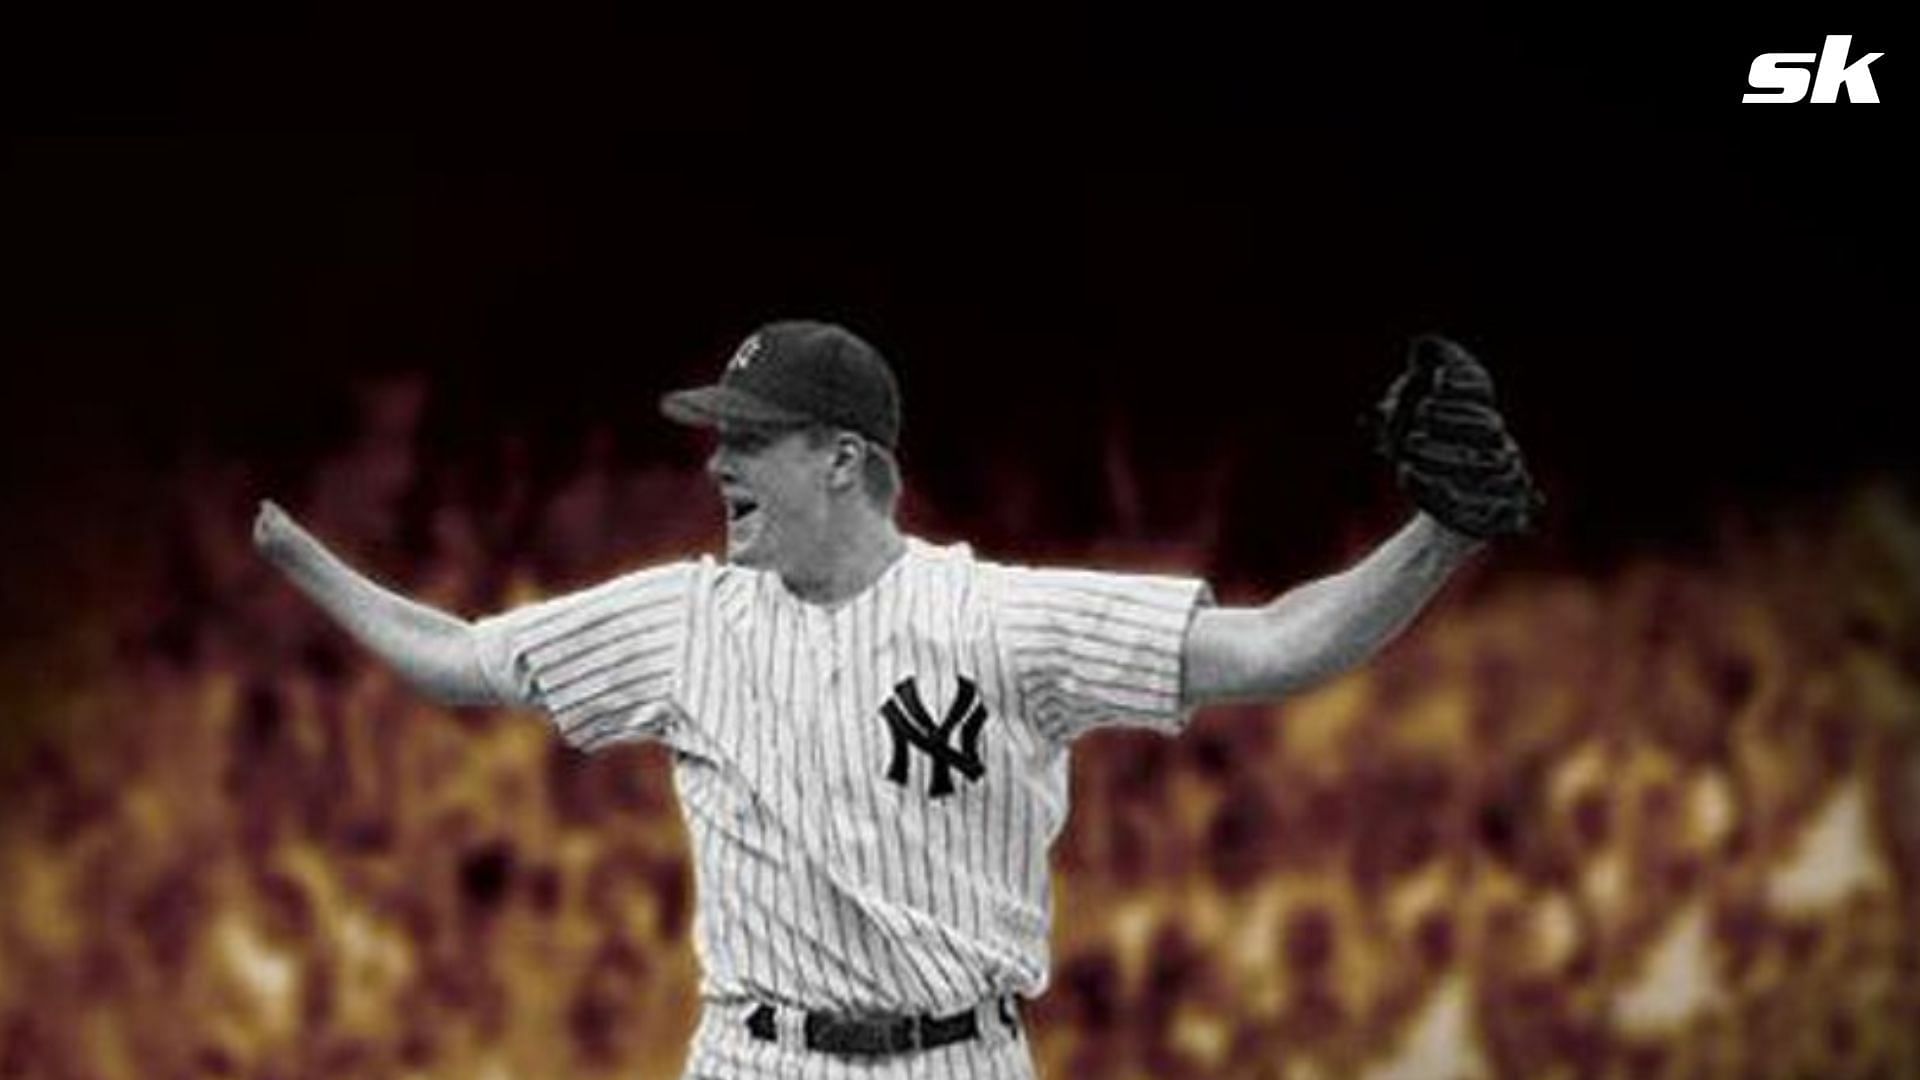 One-handed pitcher Jim Abbott once got candid about his inspirational career in MLB, pitching with one arm, Picture Credit: Jim Abbott Twitter